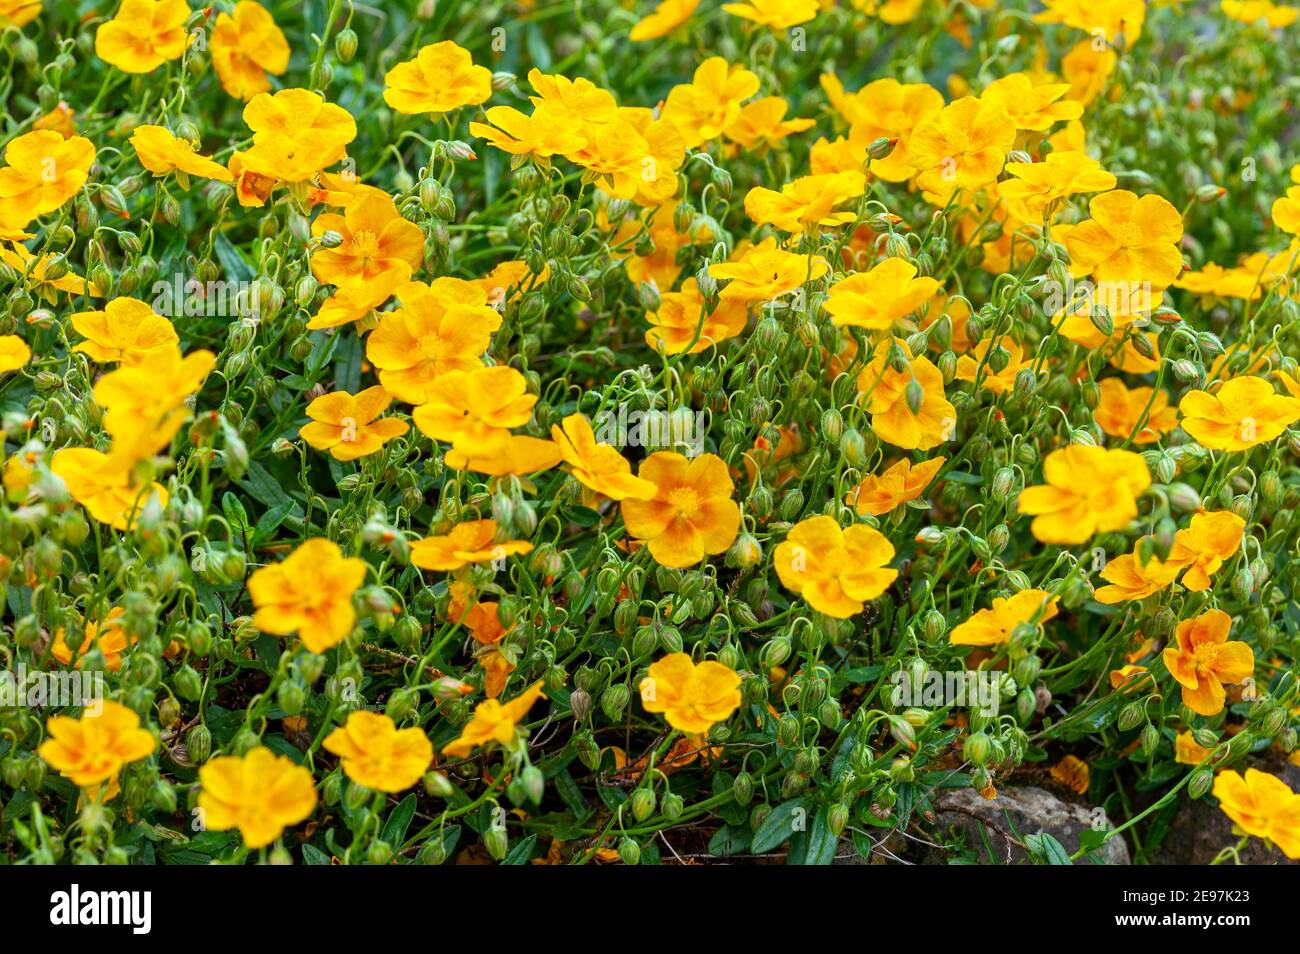 Helianthemum 'Old Gold' a yellow herbaceous springtime summer flower plant commonly known as rock rose, stock photo image Stock Photo